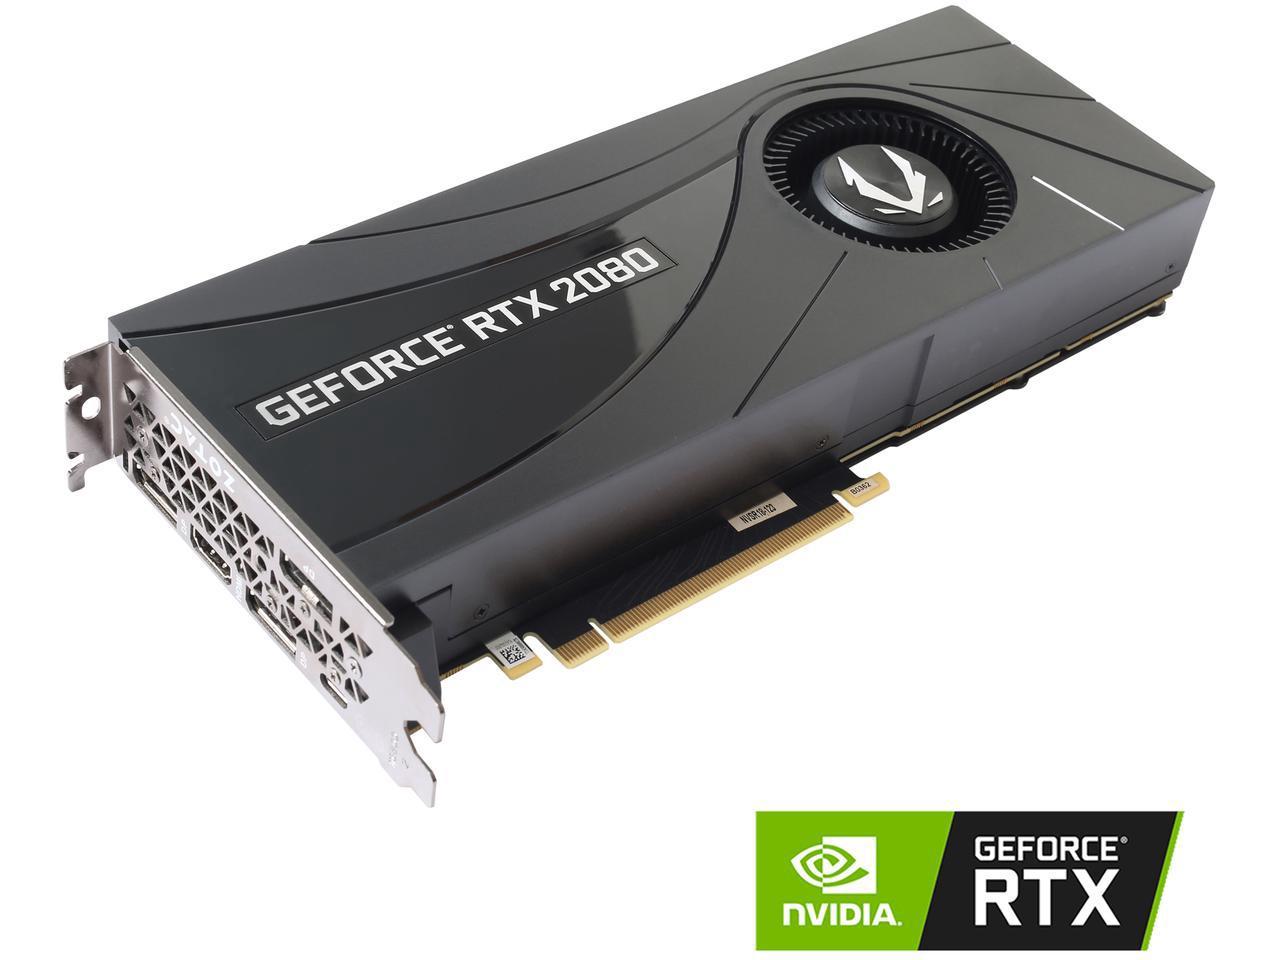 ZOTAC GAMING GeForce RTX 2080 Blower 8GB GDDR6 256-bit Gaming Graphics Card, Metal Backplate - ZT-T20800A-10P